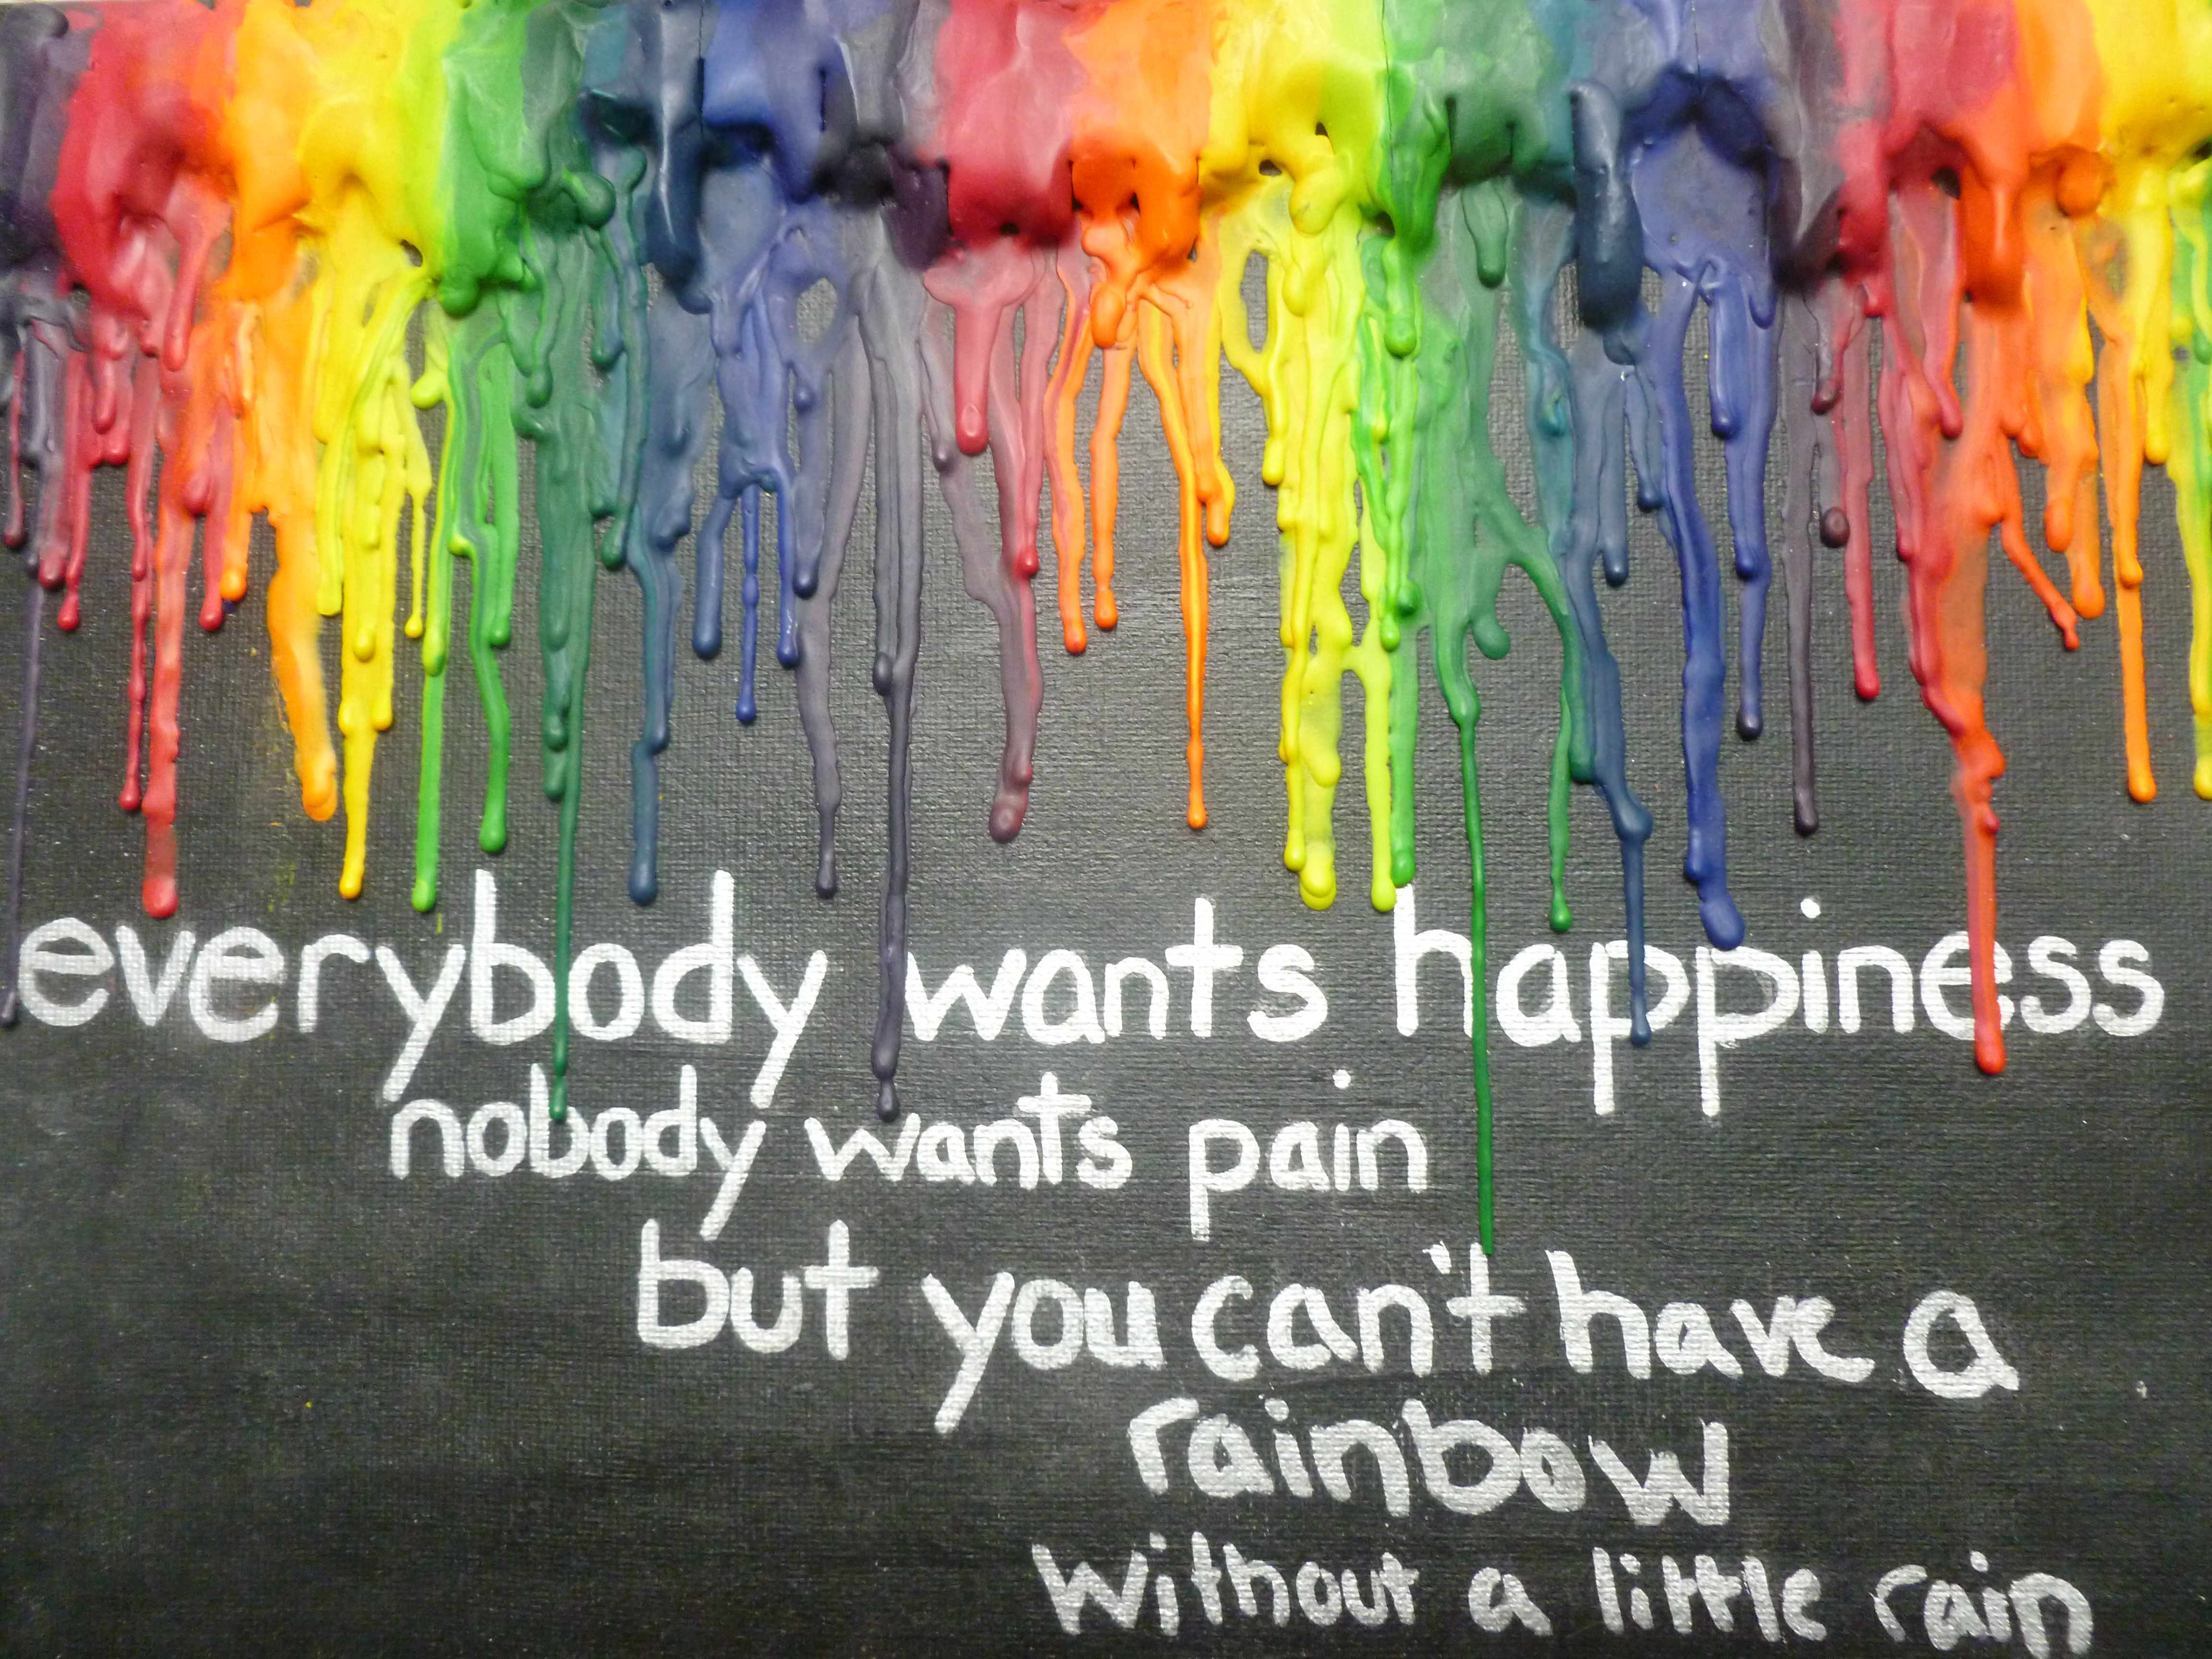 Everybody be happy. There is no Rainbow without Rain. You can't have a Rainbow without a little Rain. Everybody want your body. I just want to be Happy.